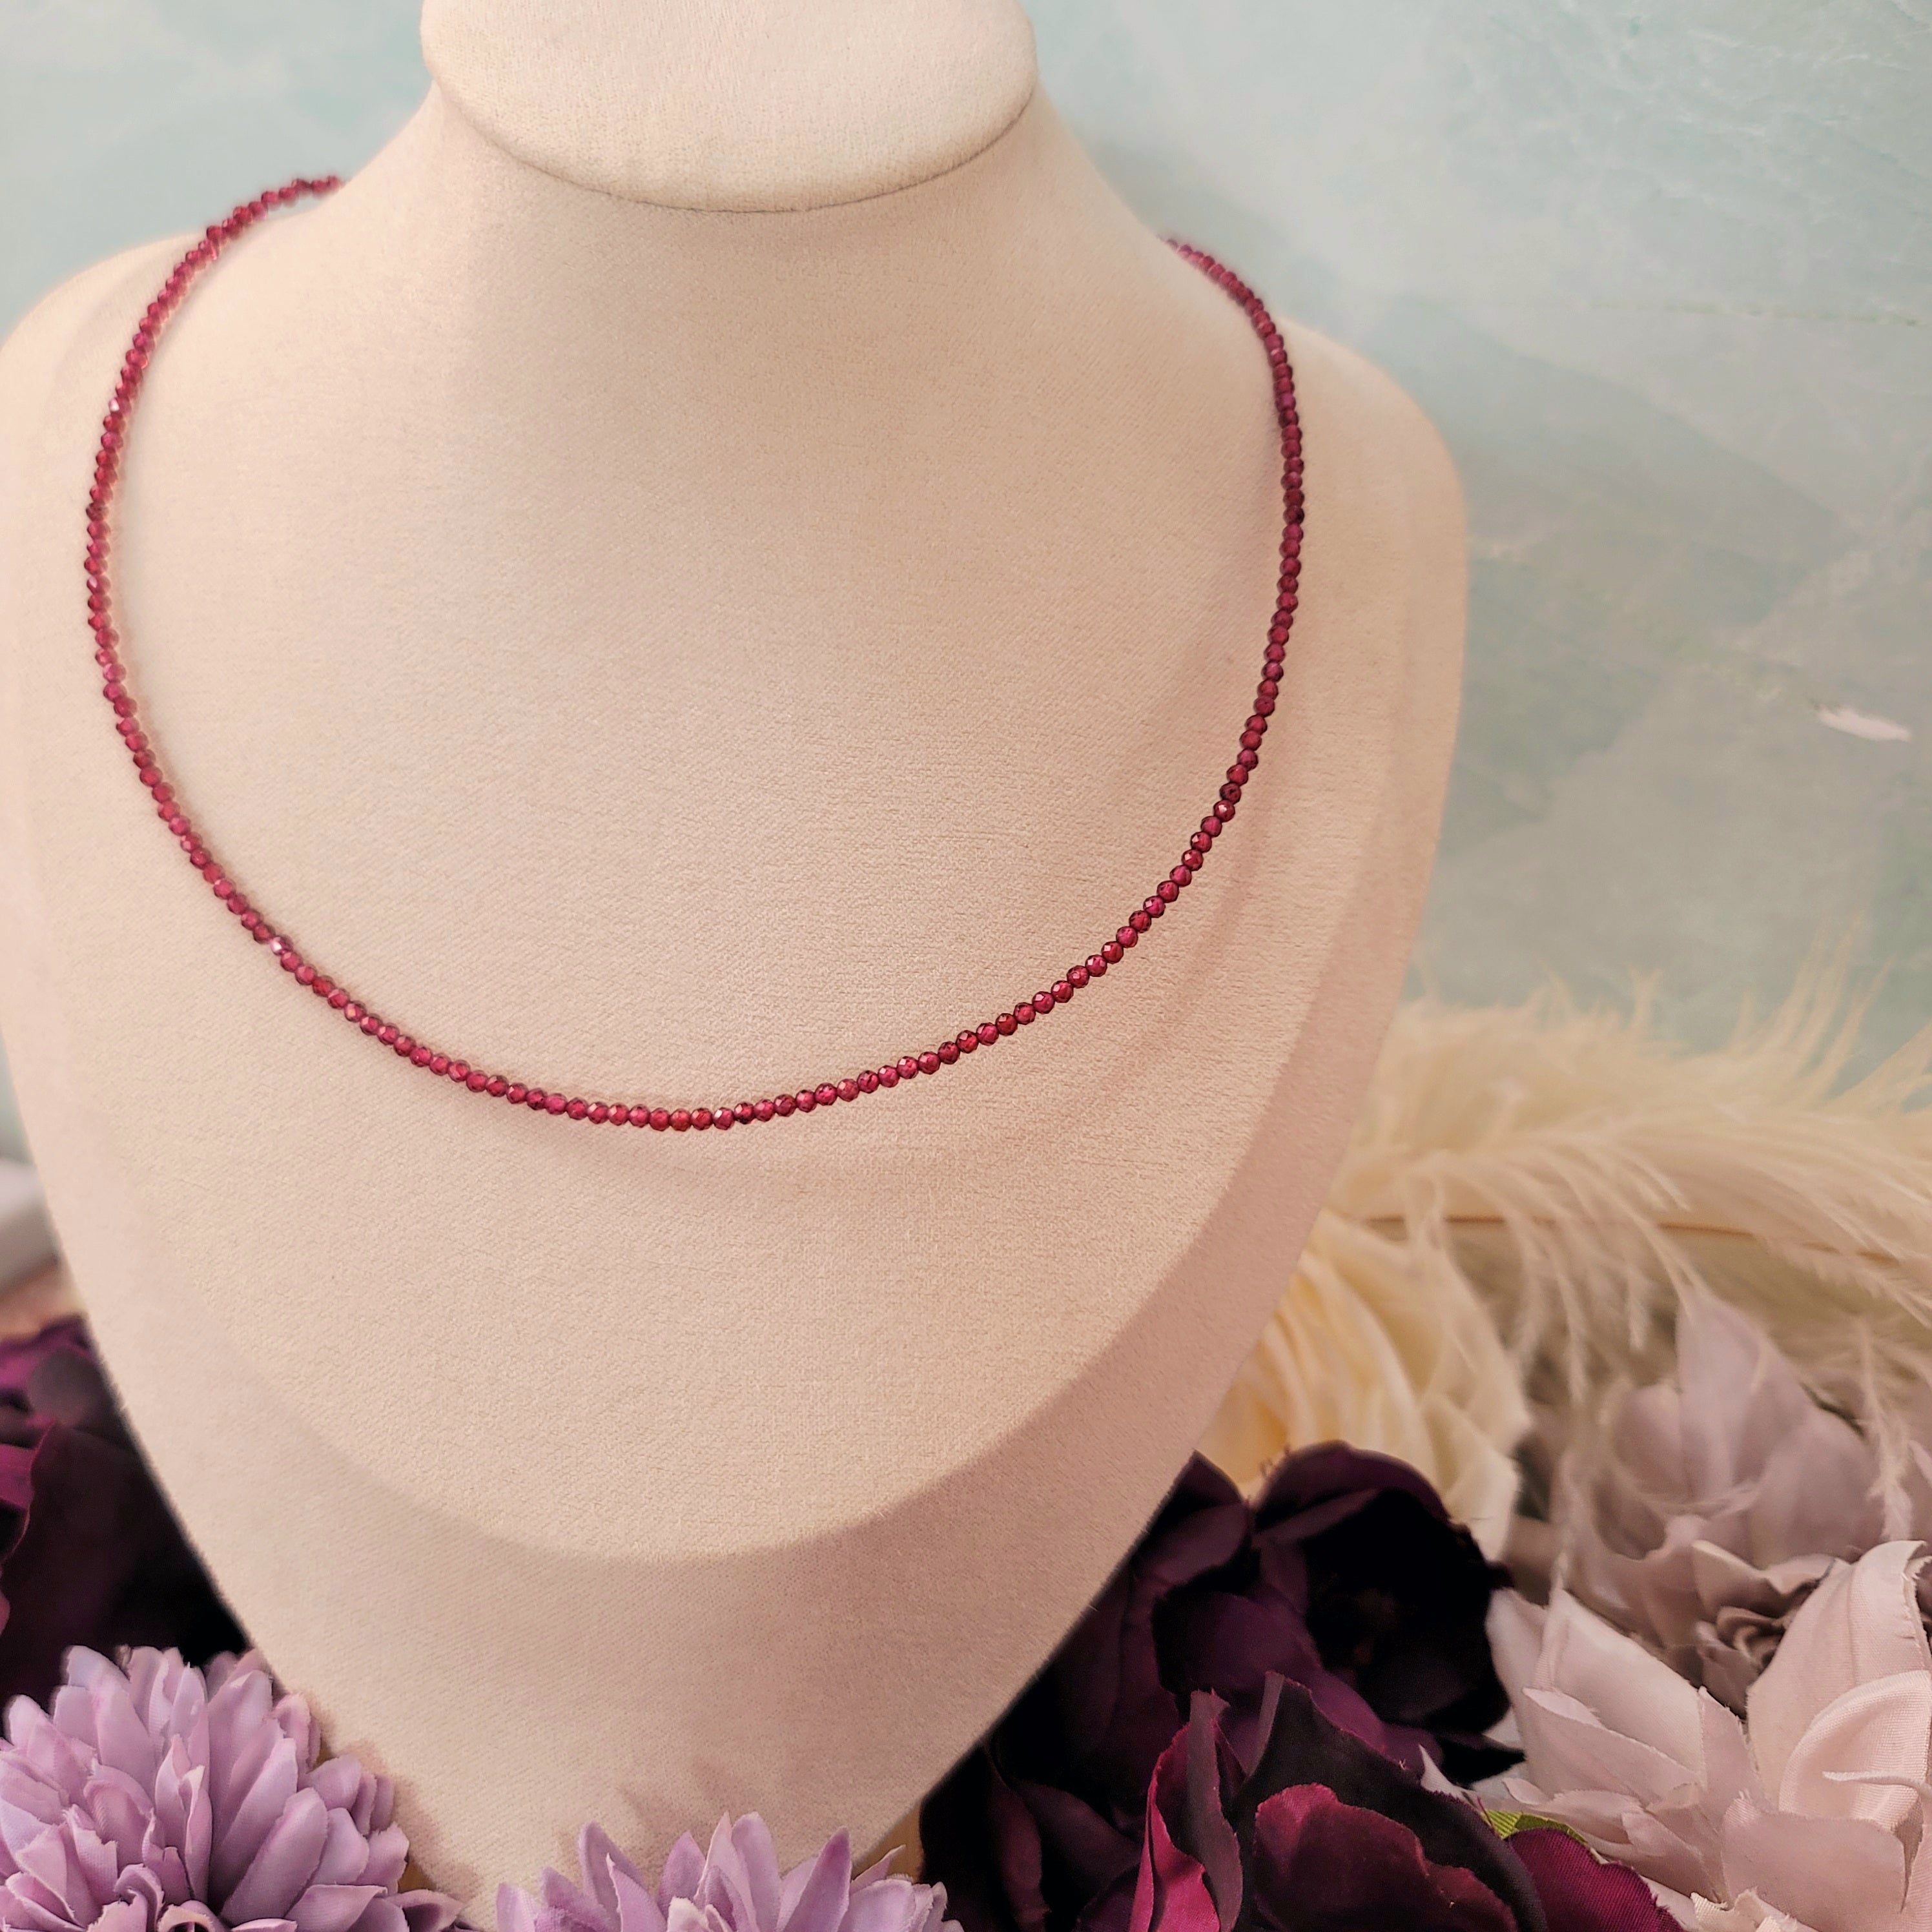 Rhodolite Purple Garnet Micro Faceted Choker/Layering Necklace for Grounding, Health and Strength